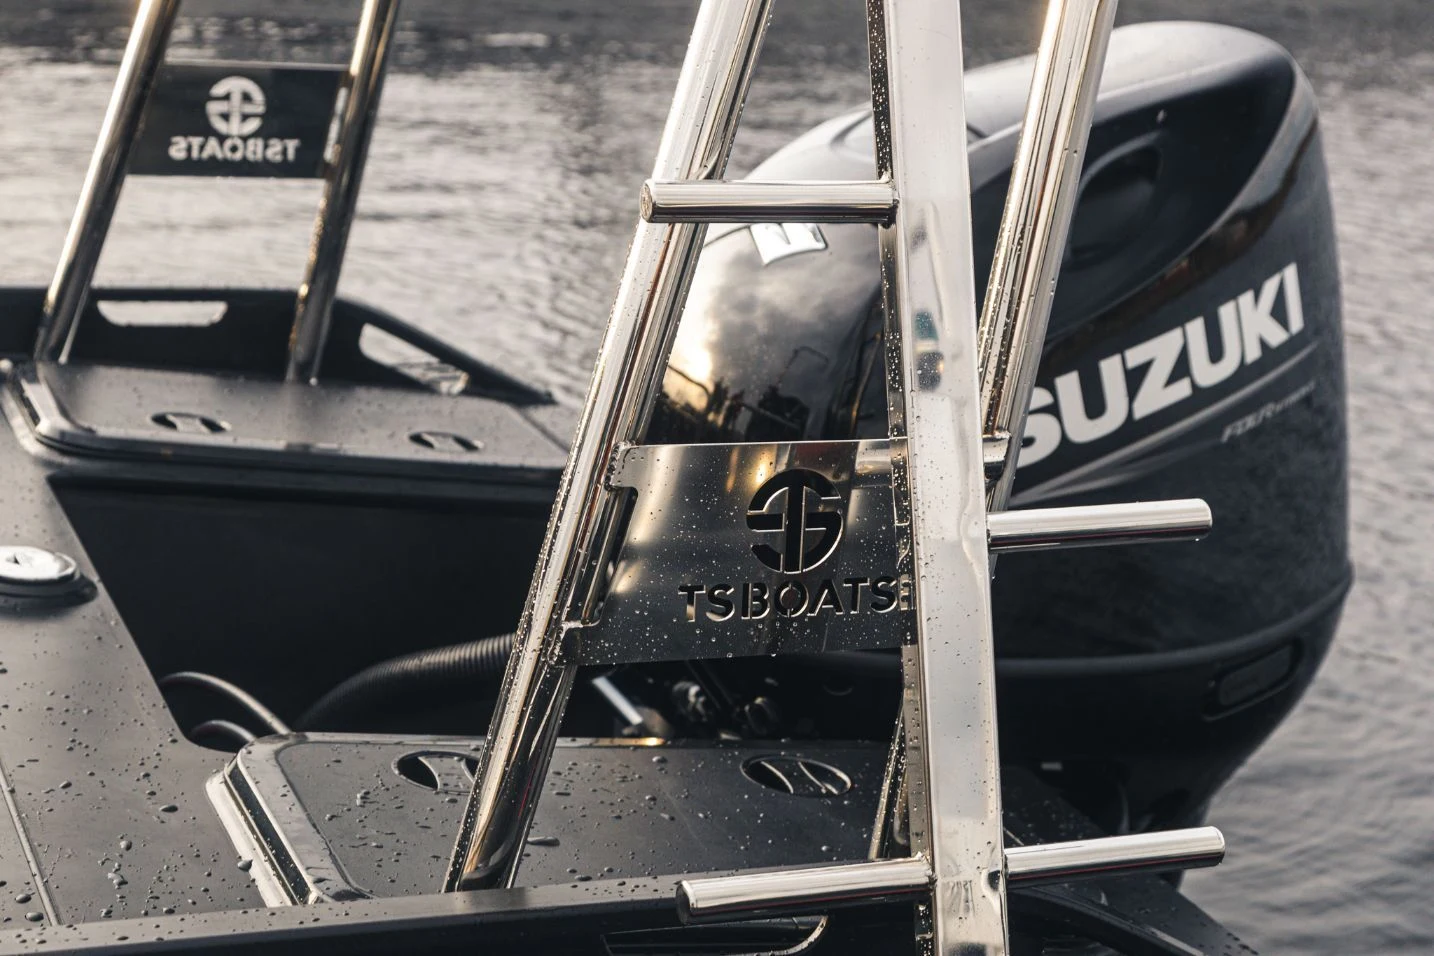 Close-up of a sleek HDPE boat transom with a polished stainless steel ladder, Suzuki outboard engine, and TS Boats logo, with water droplets and a blurred water background.